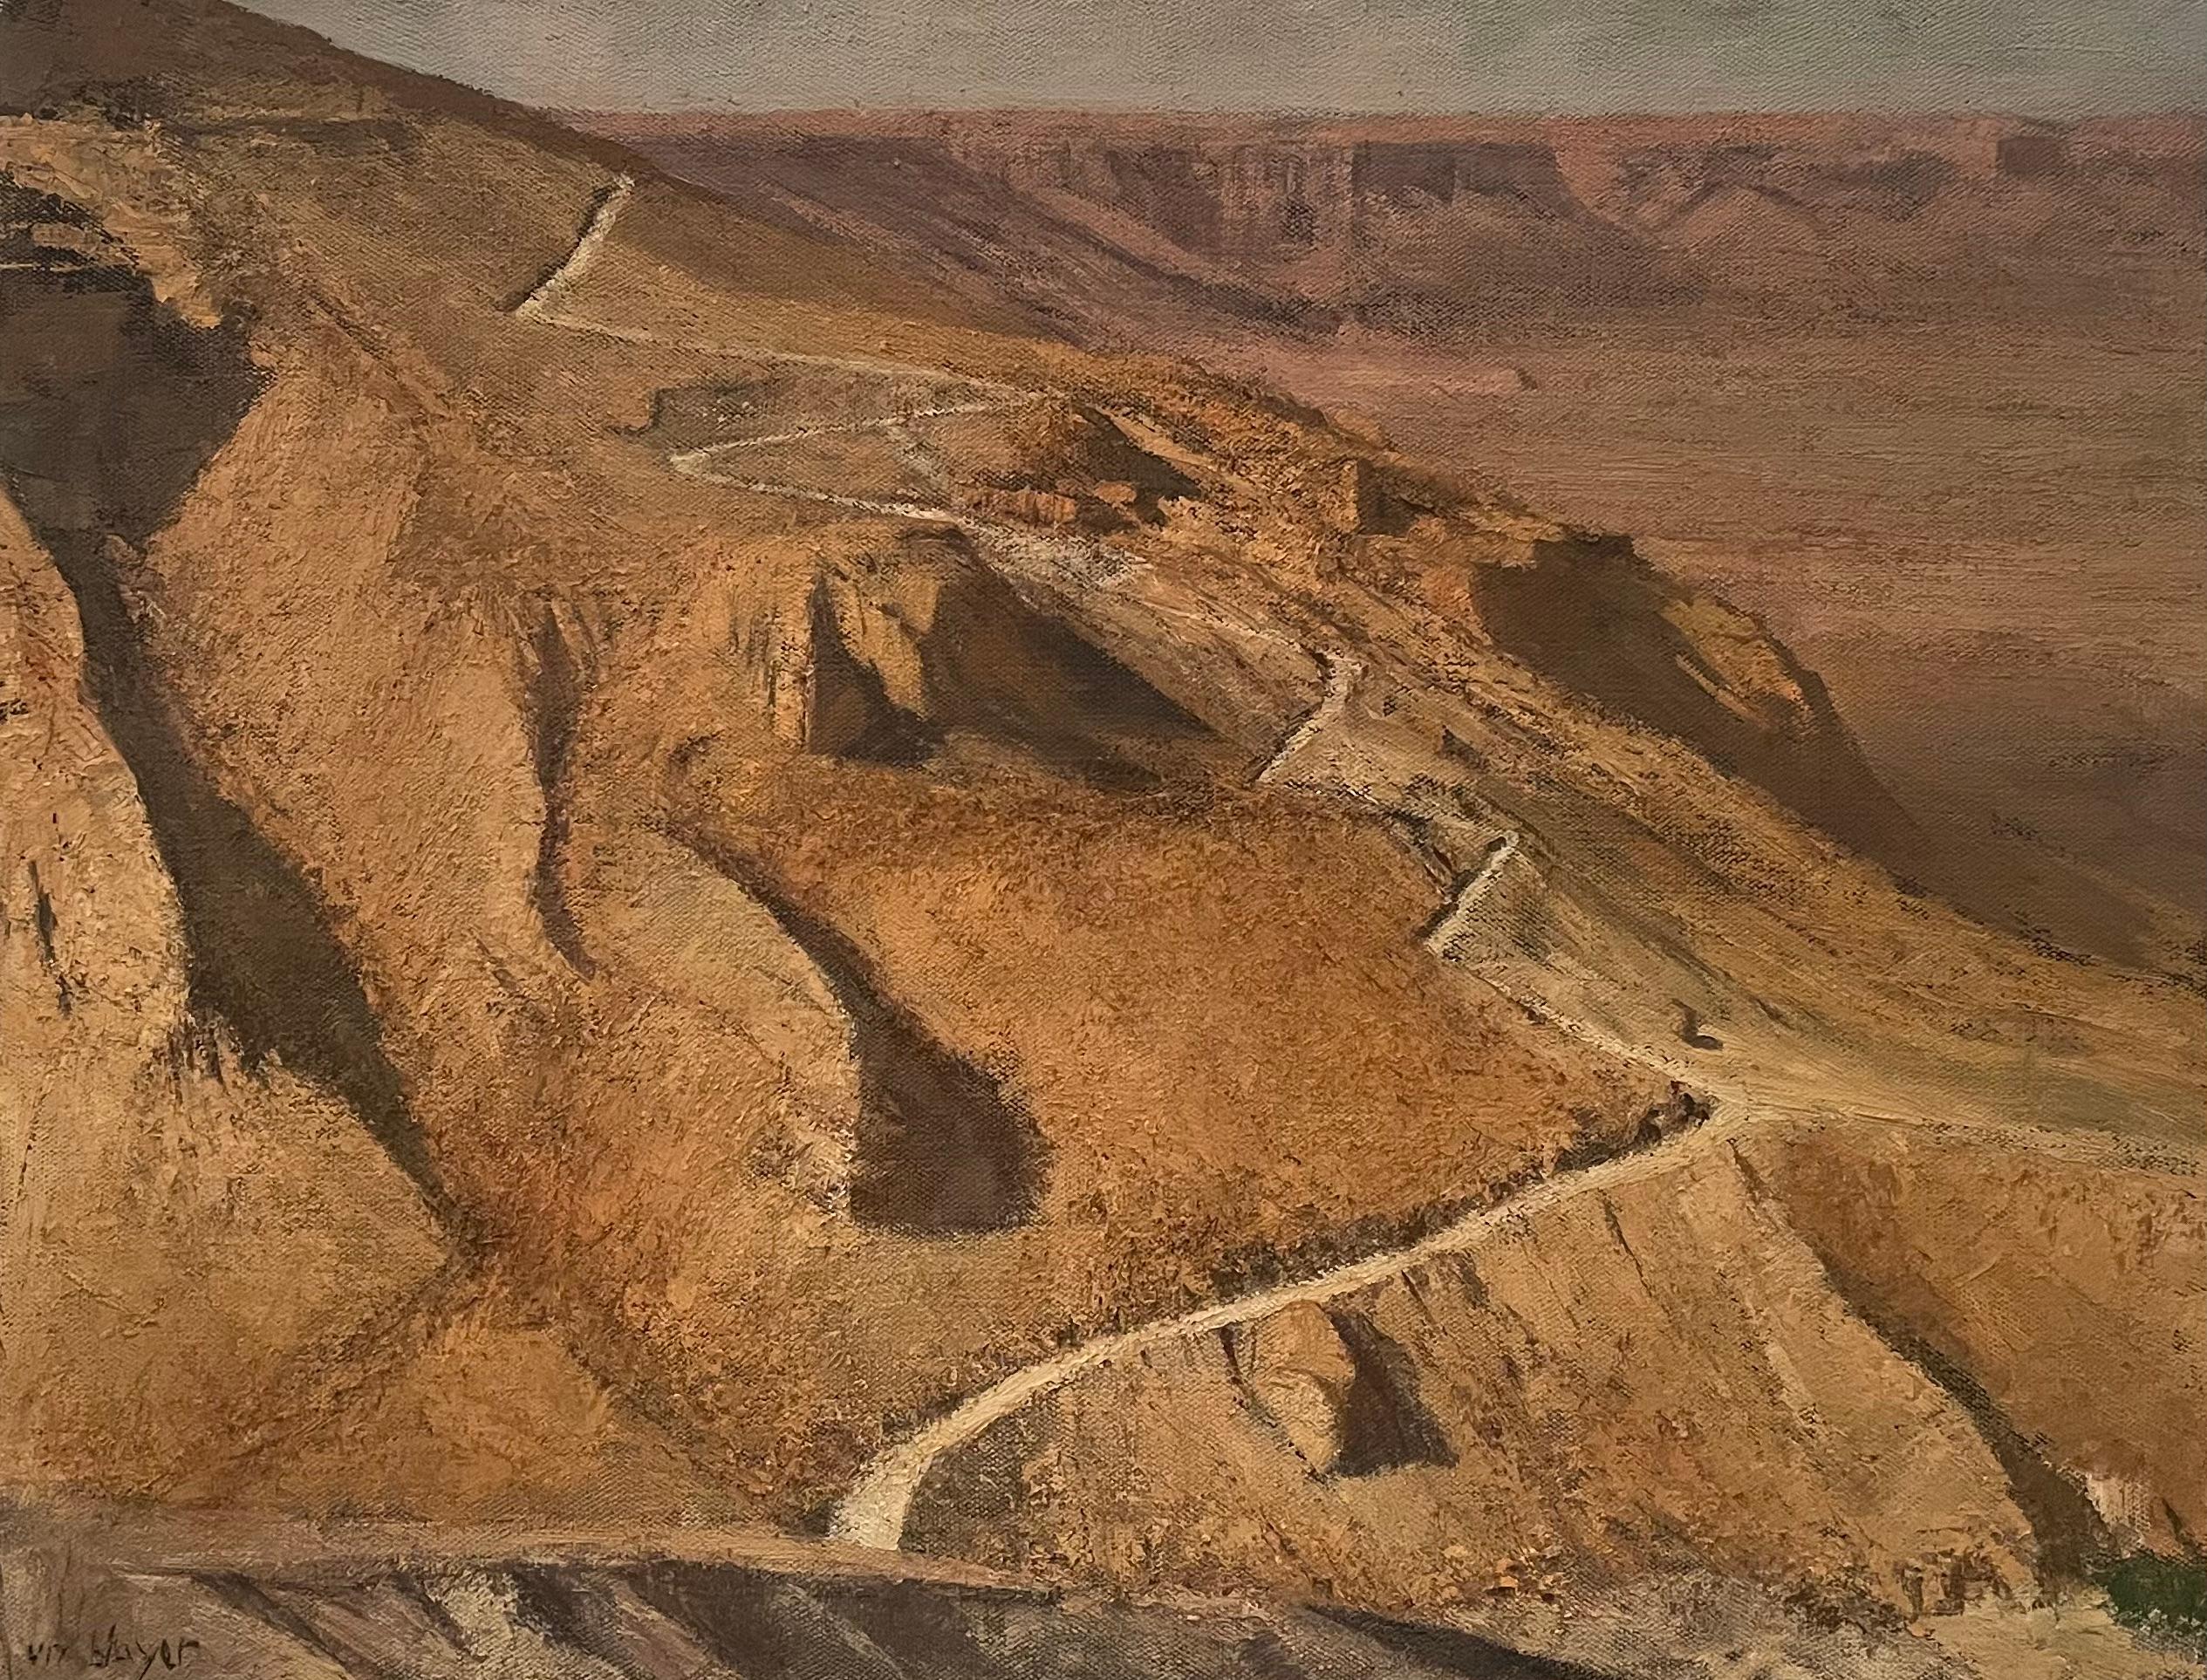 "The Snake Path, Masada" is a 25" x 32" oil on linen masterpiece by Israeli artist Uri Blayer, encapsulating the rugged and historical essence of the Judean Desert. Blayer's style is grounded in realism, with a touch of impressionistic flair,